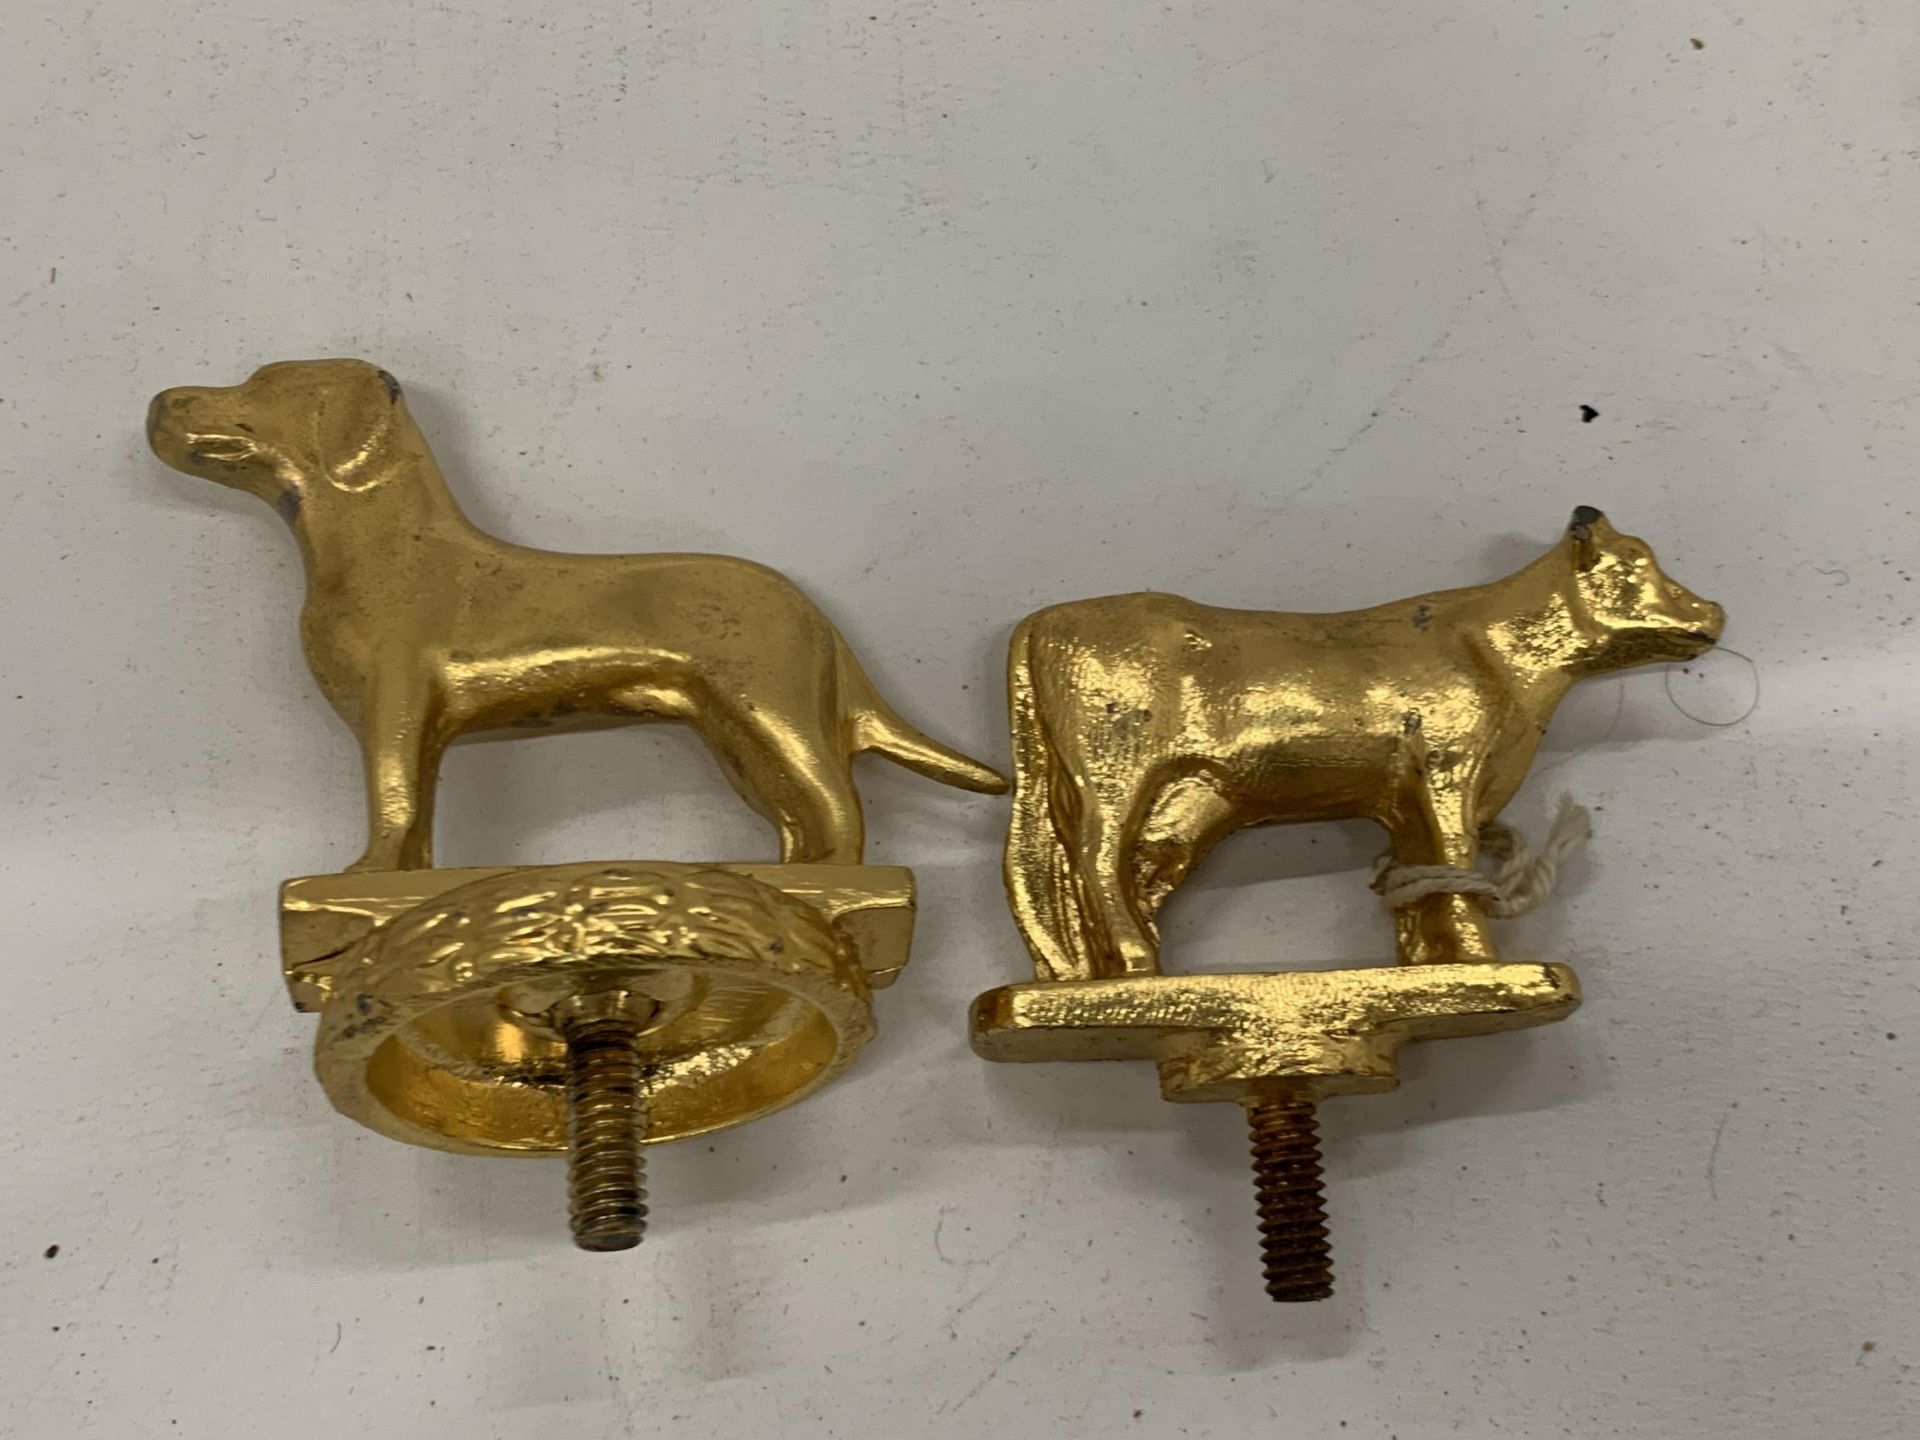 TWO VINTAGE GOLD PAINTED CAR MASCOTS - COW AND DOG